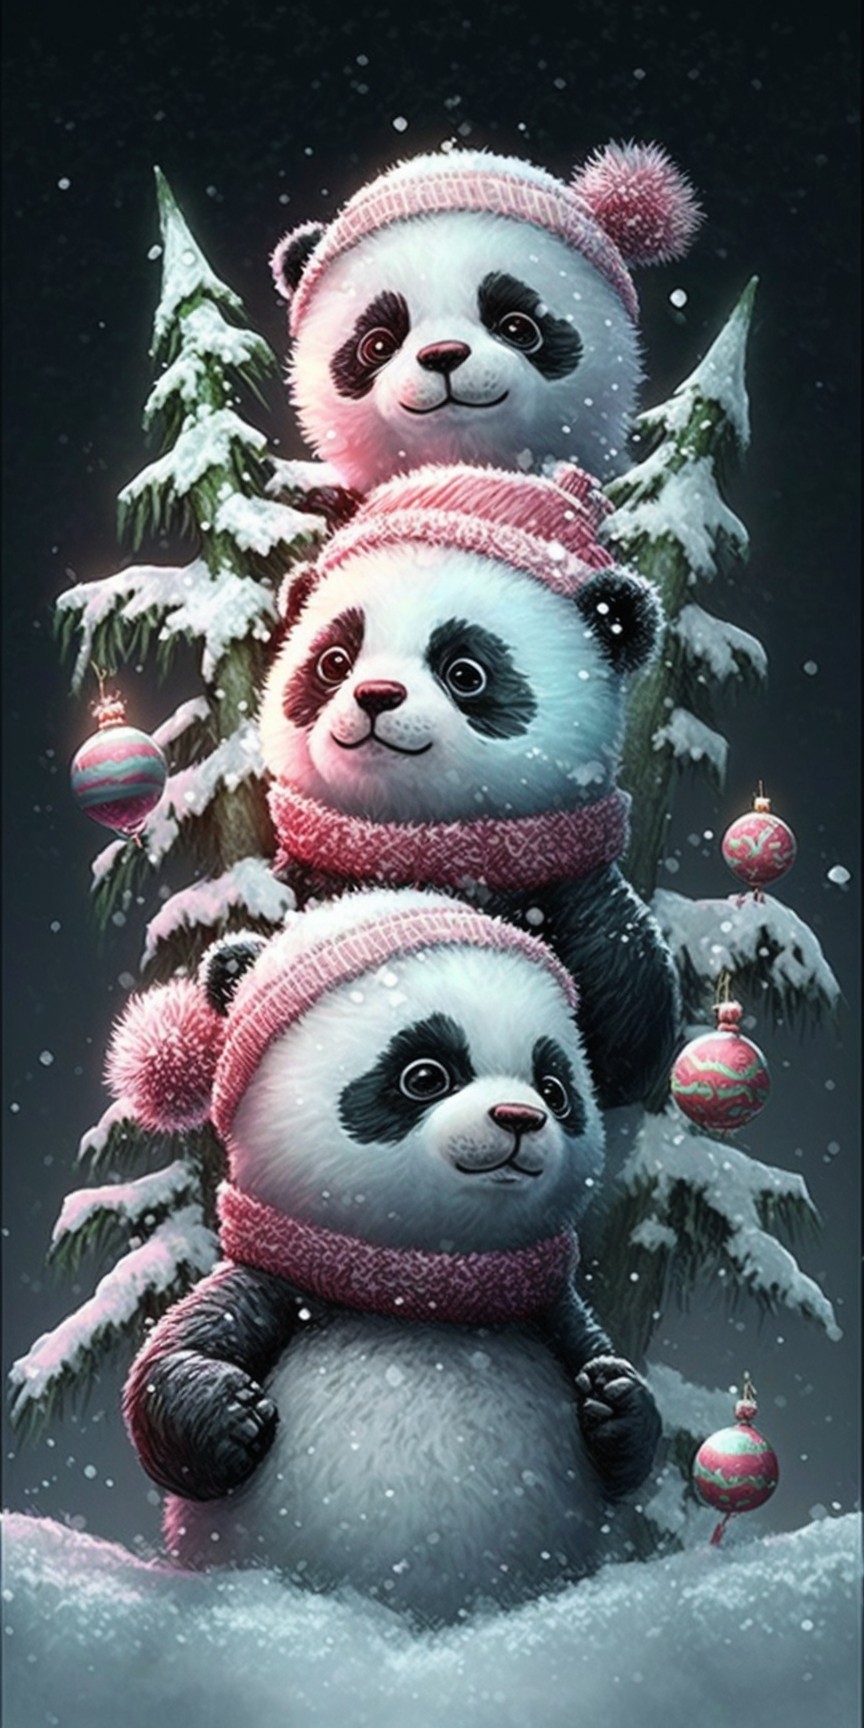 Panda family with pink hats